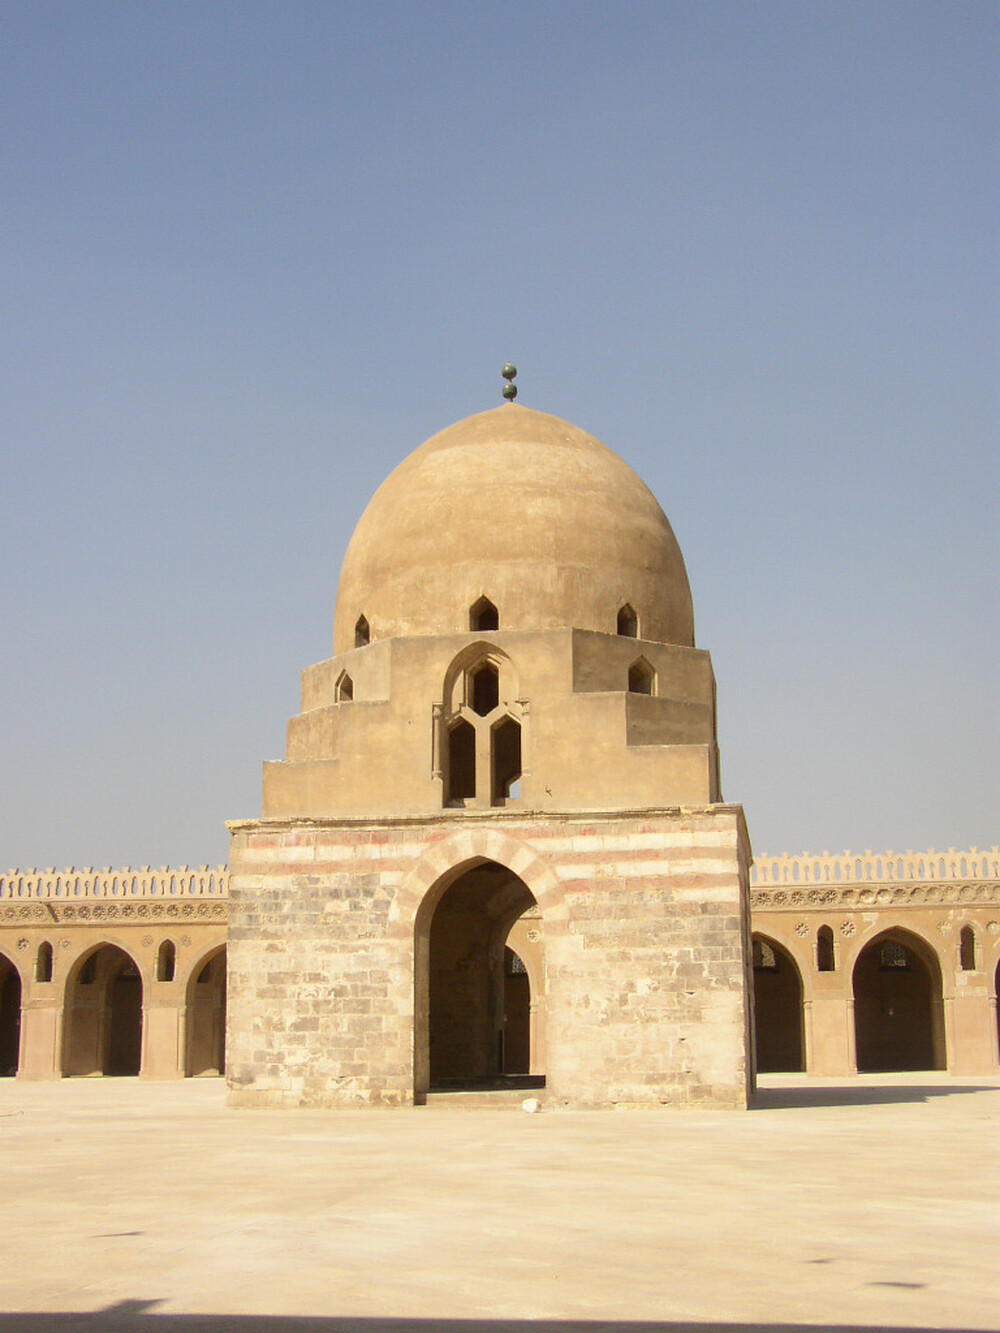 The Mosque of Ibn Tulun in Cairo, Egypt, features ancient architecture styles and decorations created from carved stucco and wood. Photo: Wikimedia Commons